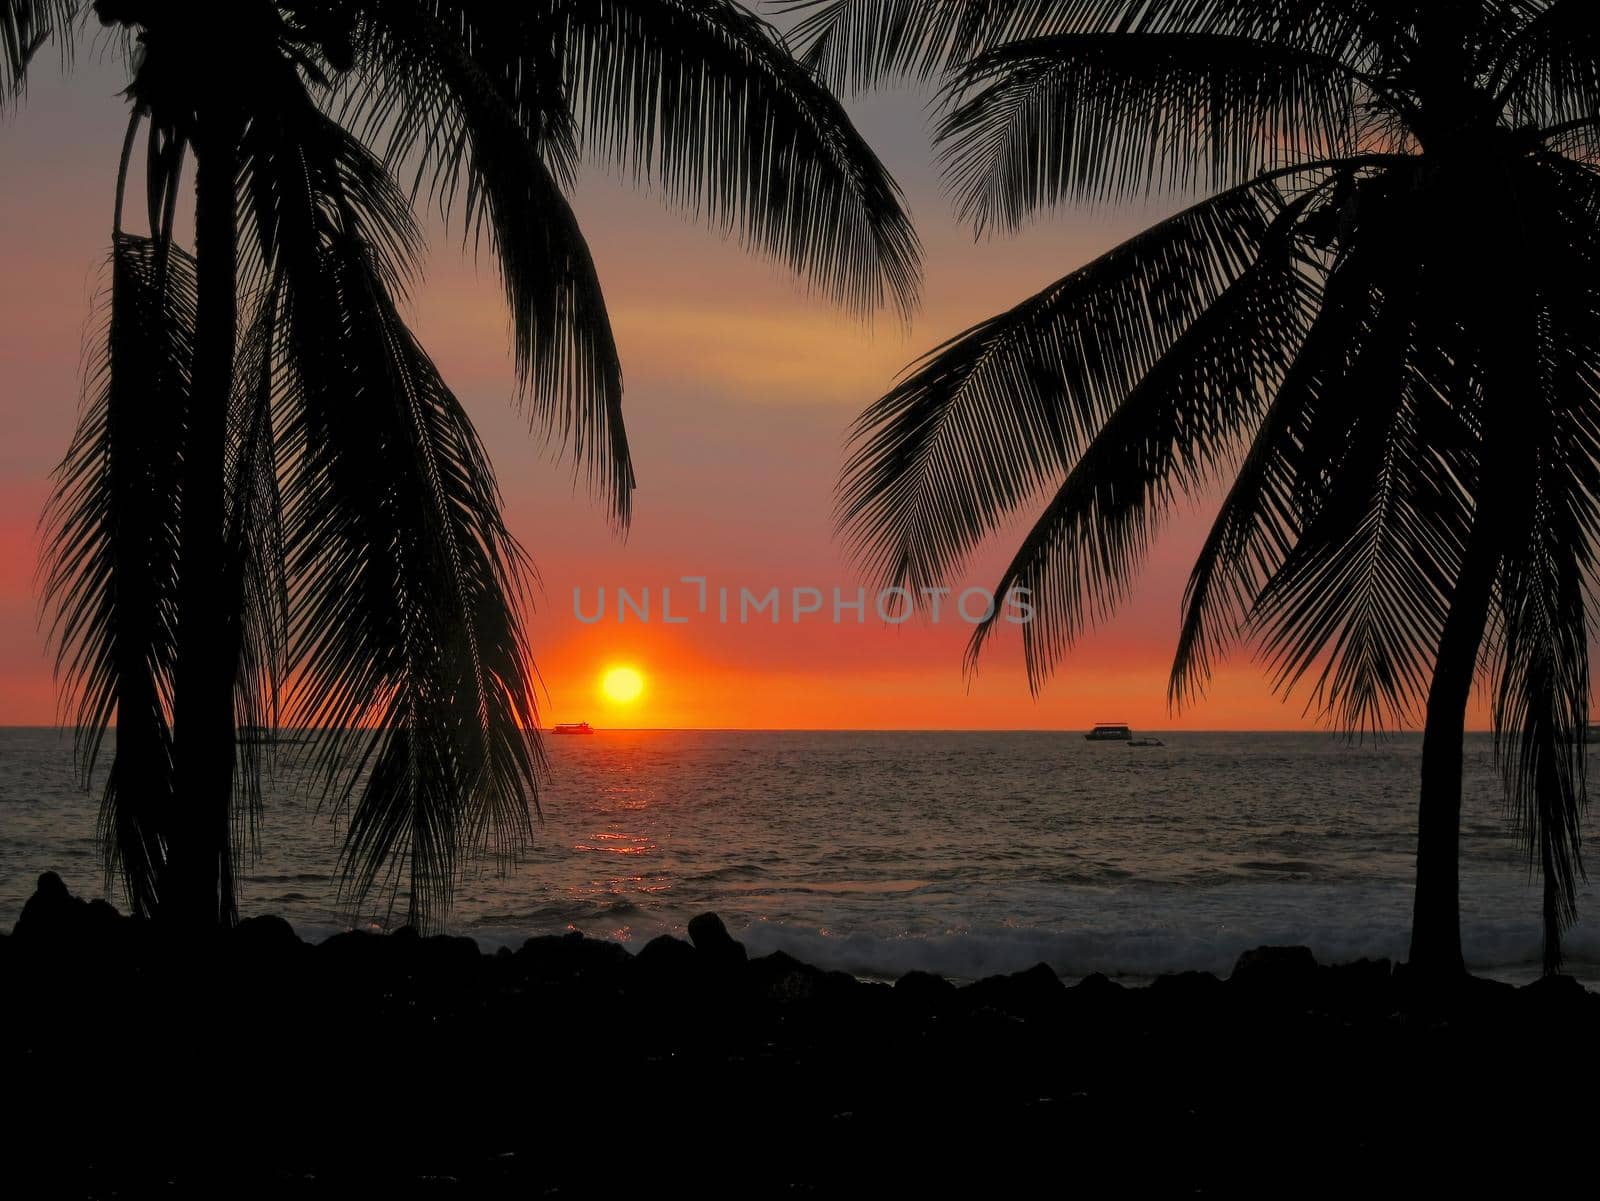 Crimson and Orange Sunset with Silhouette of Palm Trees With Ocean and distant boats in Background at Kona, Hawaii on the Big Island. A Zen like Paradise.